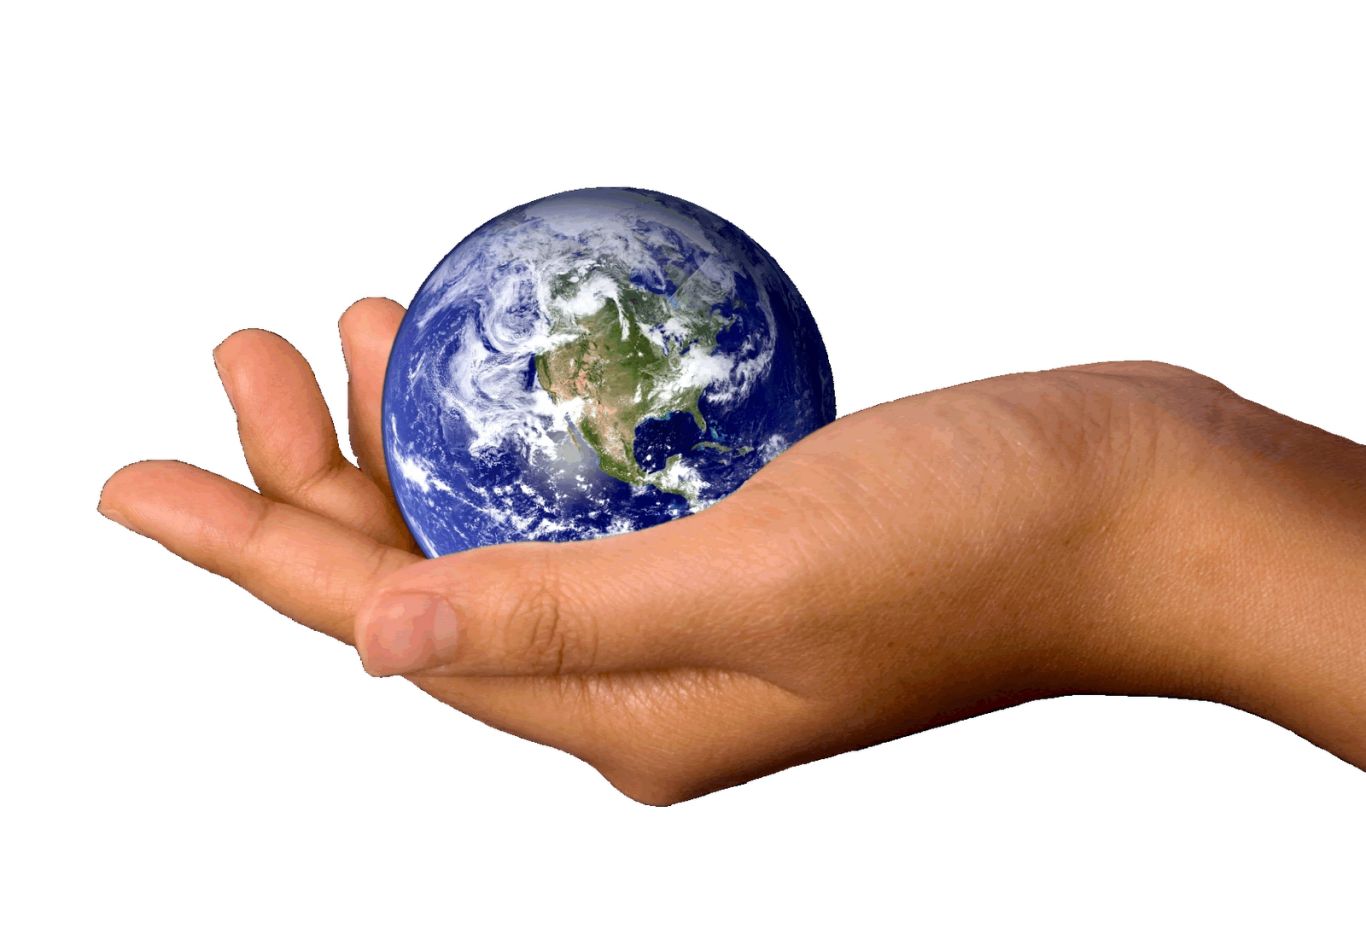 Earth in hands, PNG, hand image free    图片编号:899